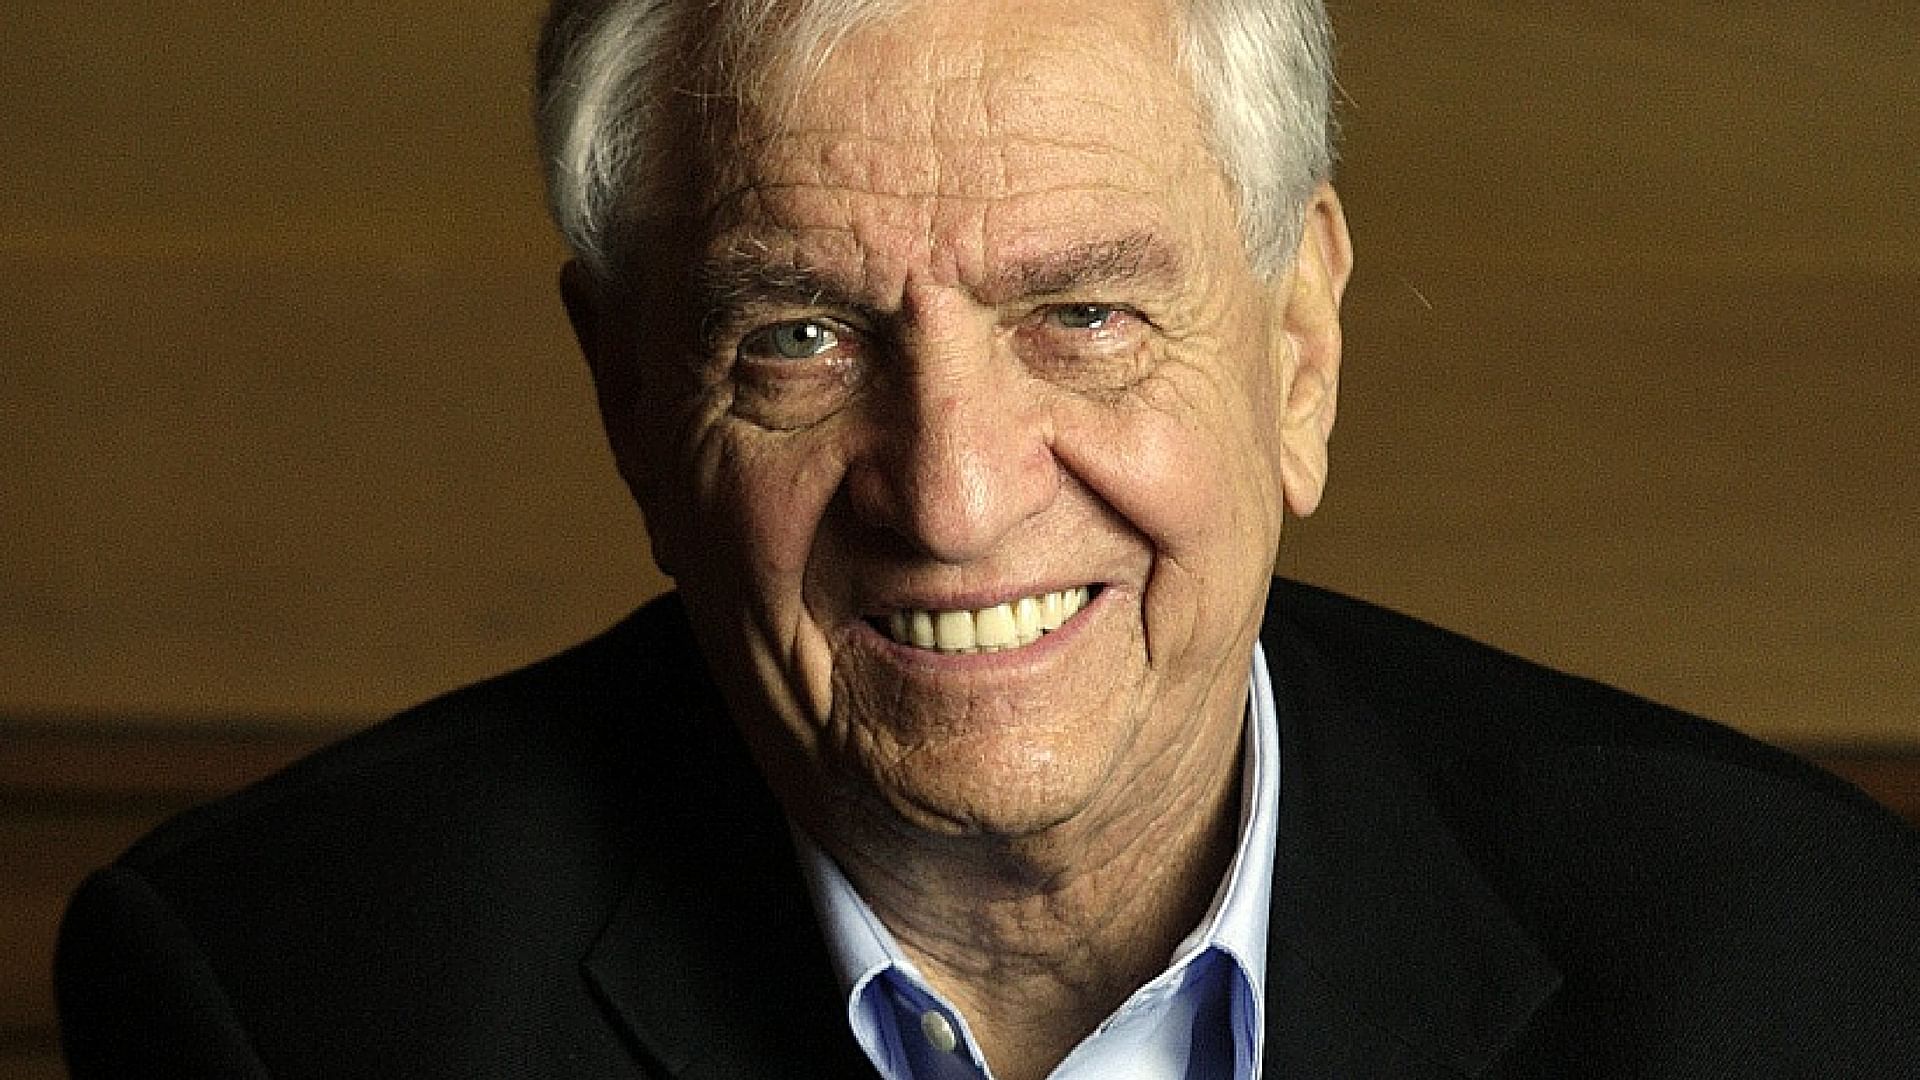 Director Garry Marshall. (Photo courtesy: Twitter/@<a href="https://twitter.com/search?f=images&amp;vertical=news&amp;q=%20garry%20marshall&amp;src=typd">NYMag</a>)